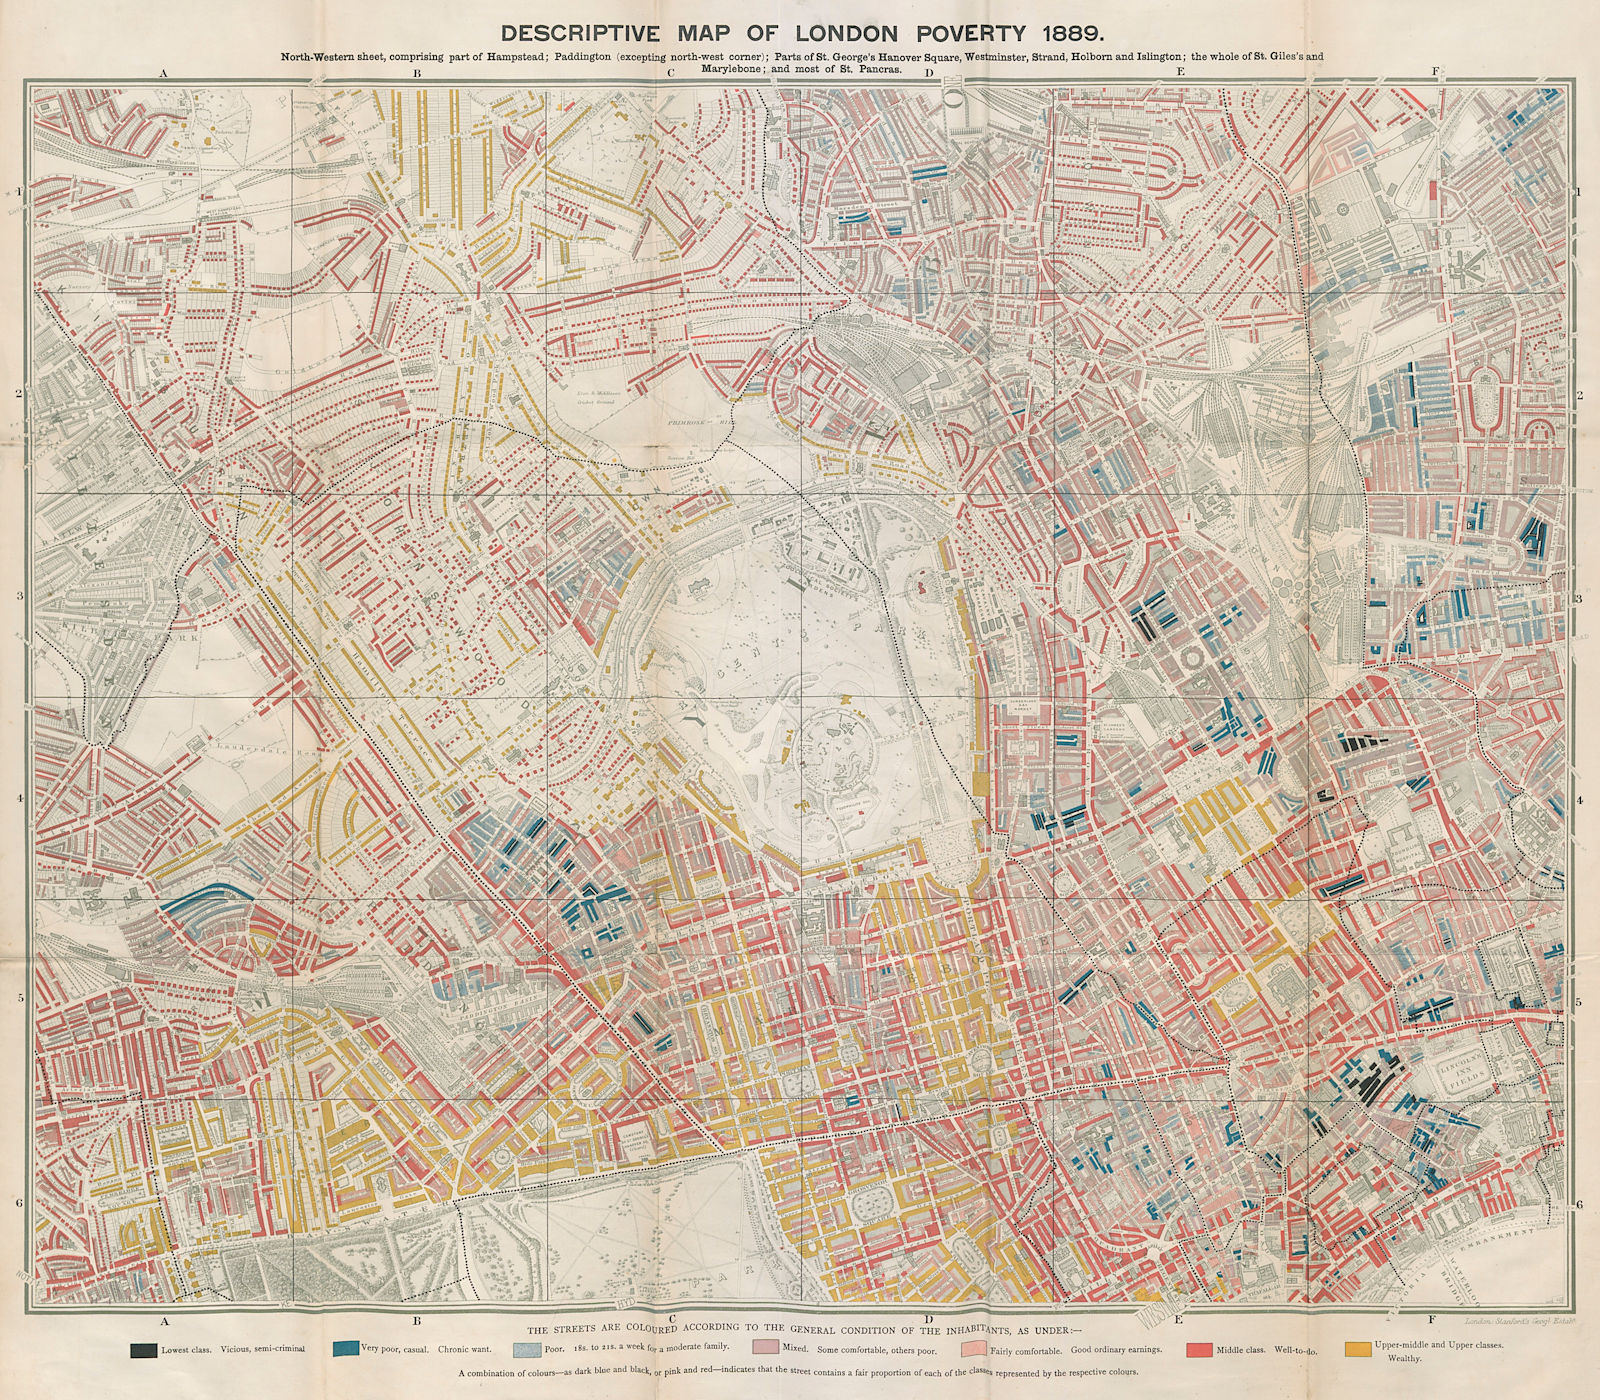 Associate Product Descriptive map of London Poverty. BOOTH. NW - West End Marylebone Mayfair 1889